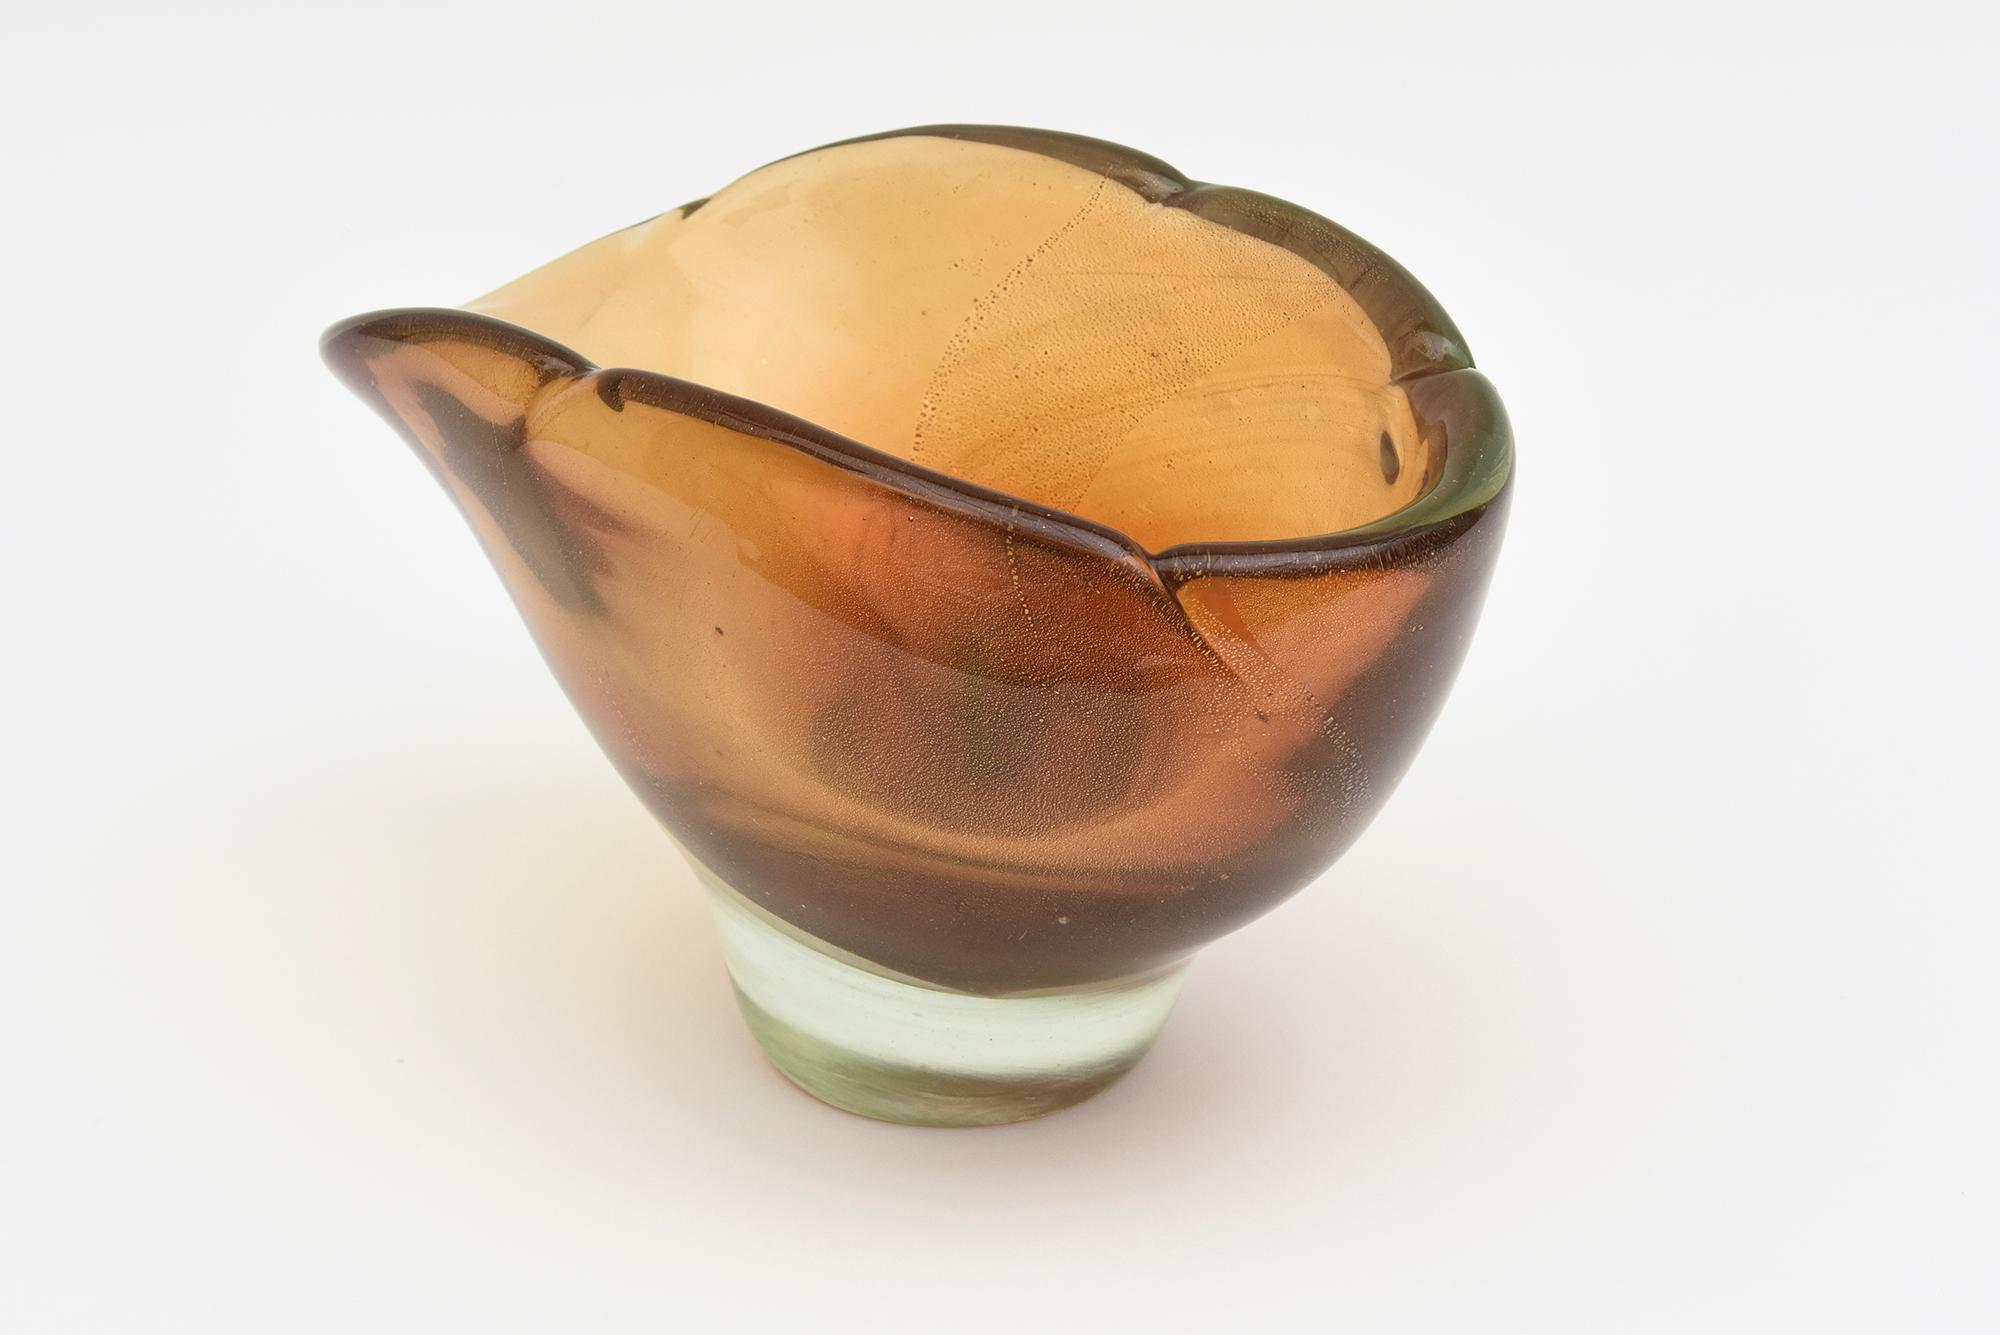 This stunning thick walled Italian vintage Murano hand blown glass bowl by Barovier & Toso is large. It is an early piece from the late 40's early 50's. The colors range from amber to light brown in sommerso form with flecks of gold aventurine in